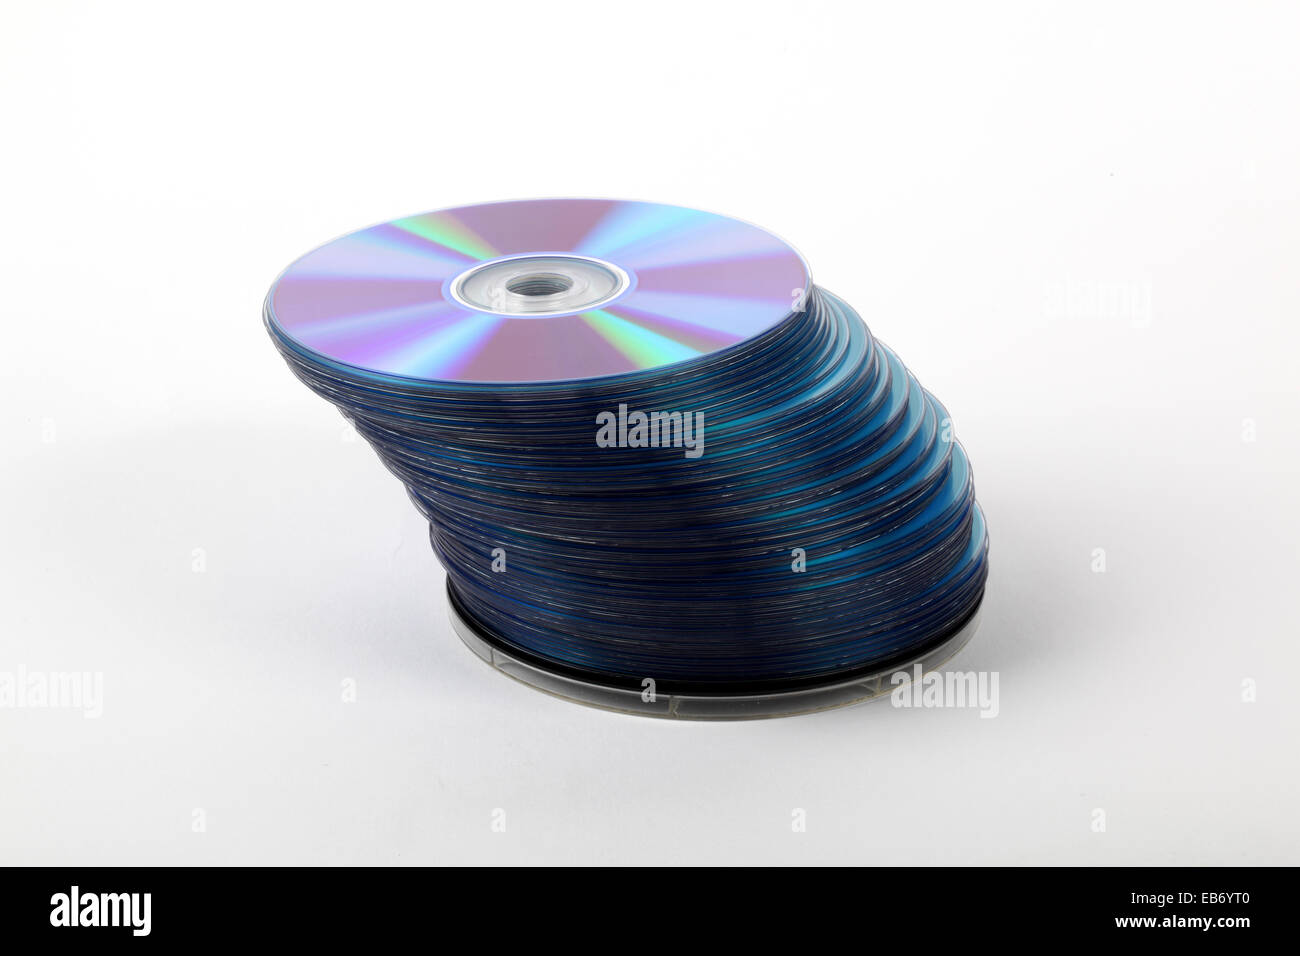 Stack of blank CDs Stock Photo - Alamy